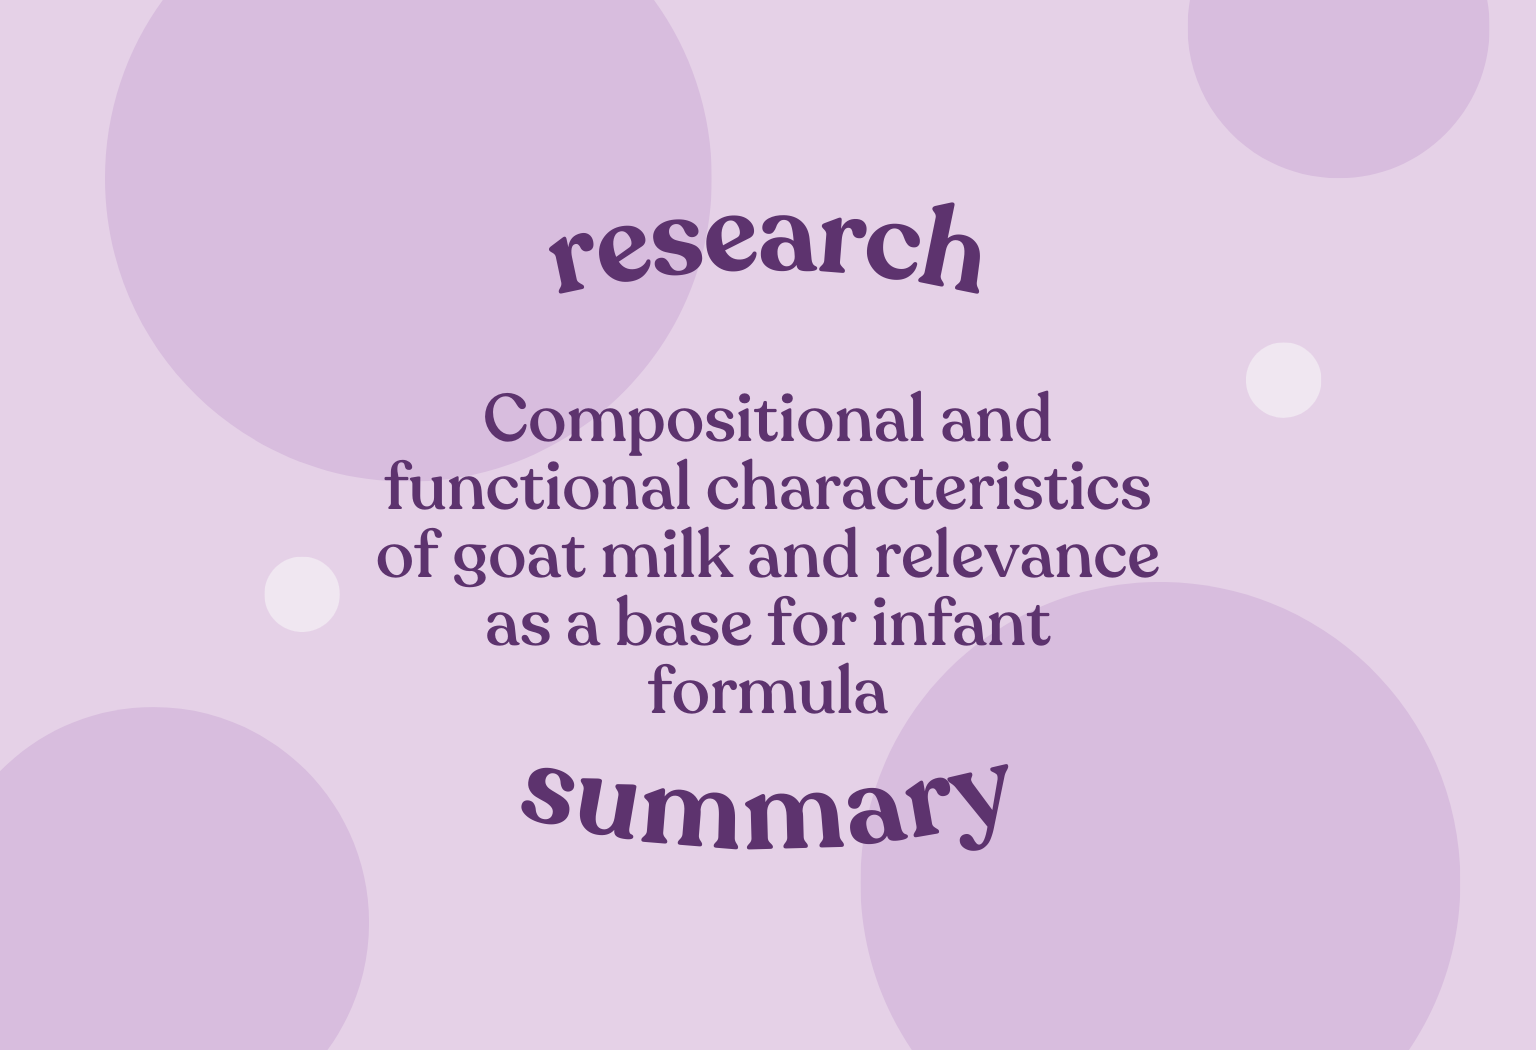 Compositional and functional characteristics of goat milk and relevance as a base for infant formula